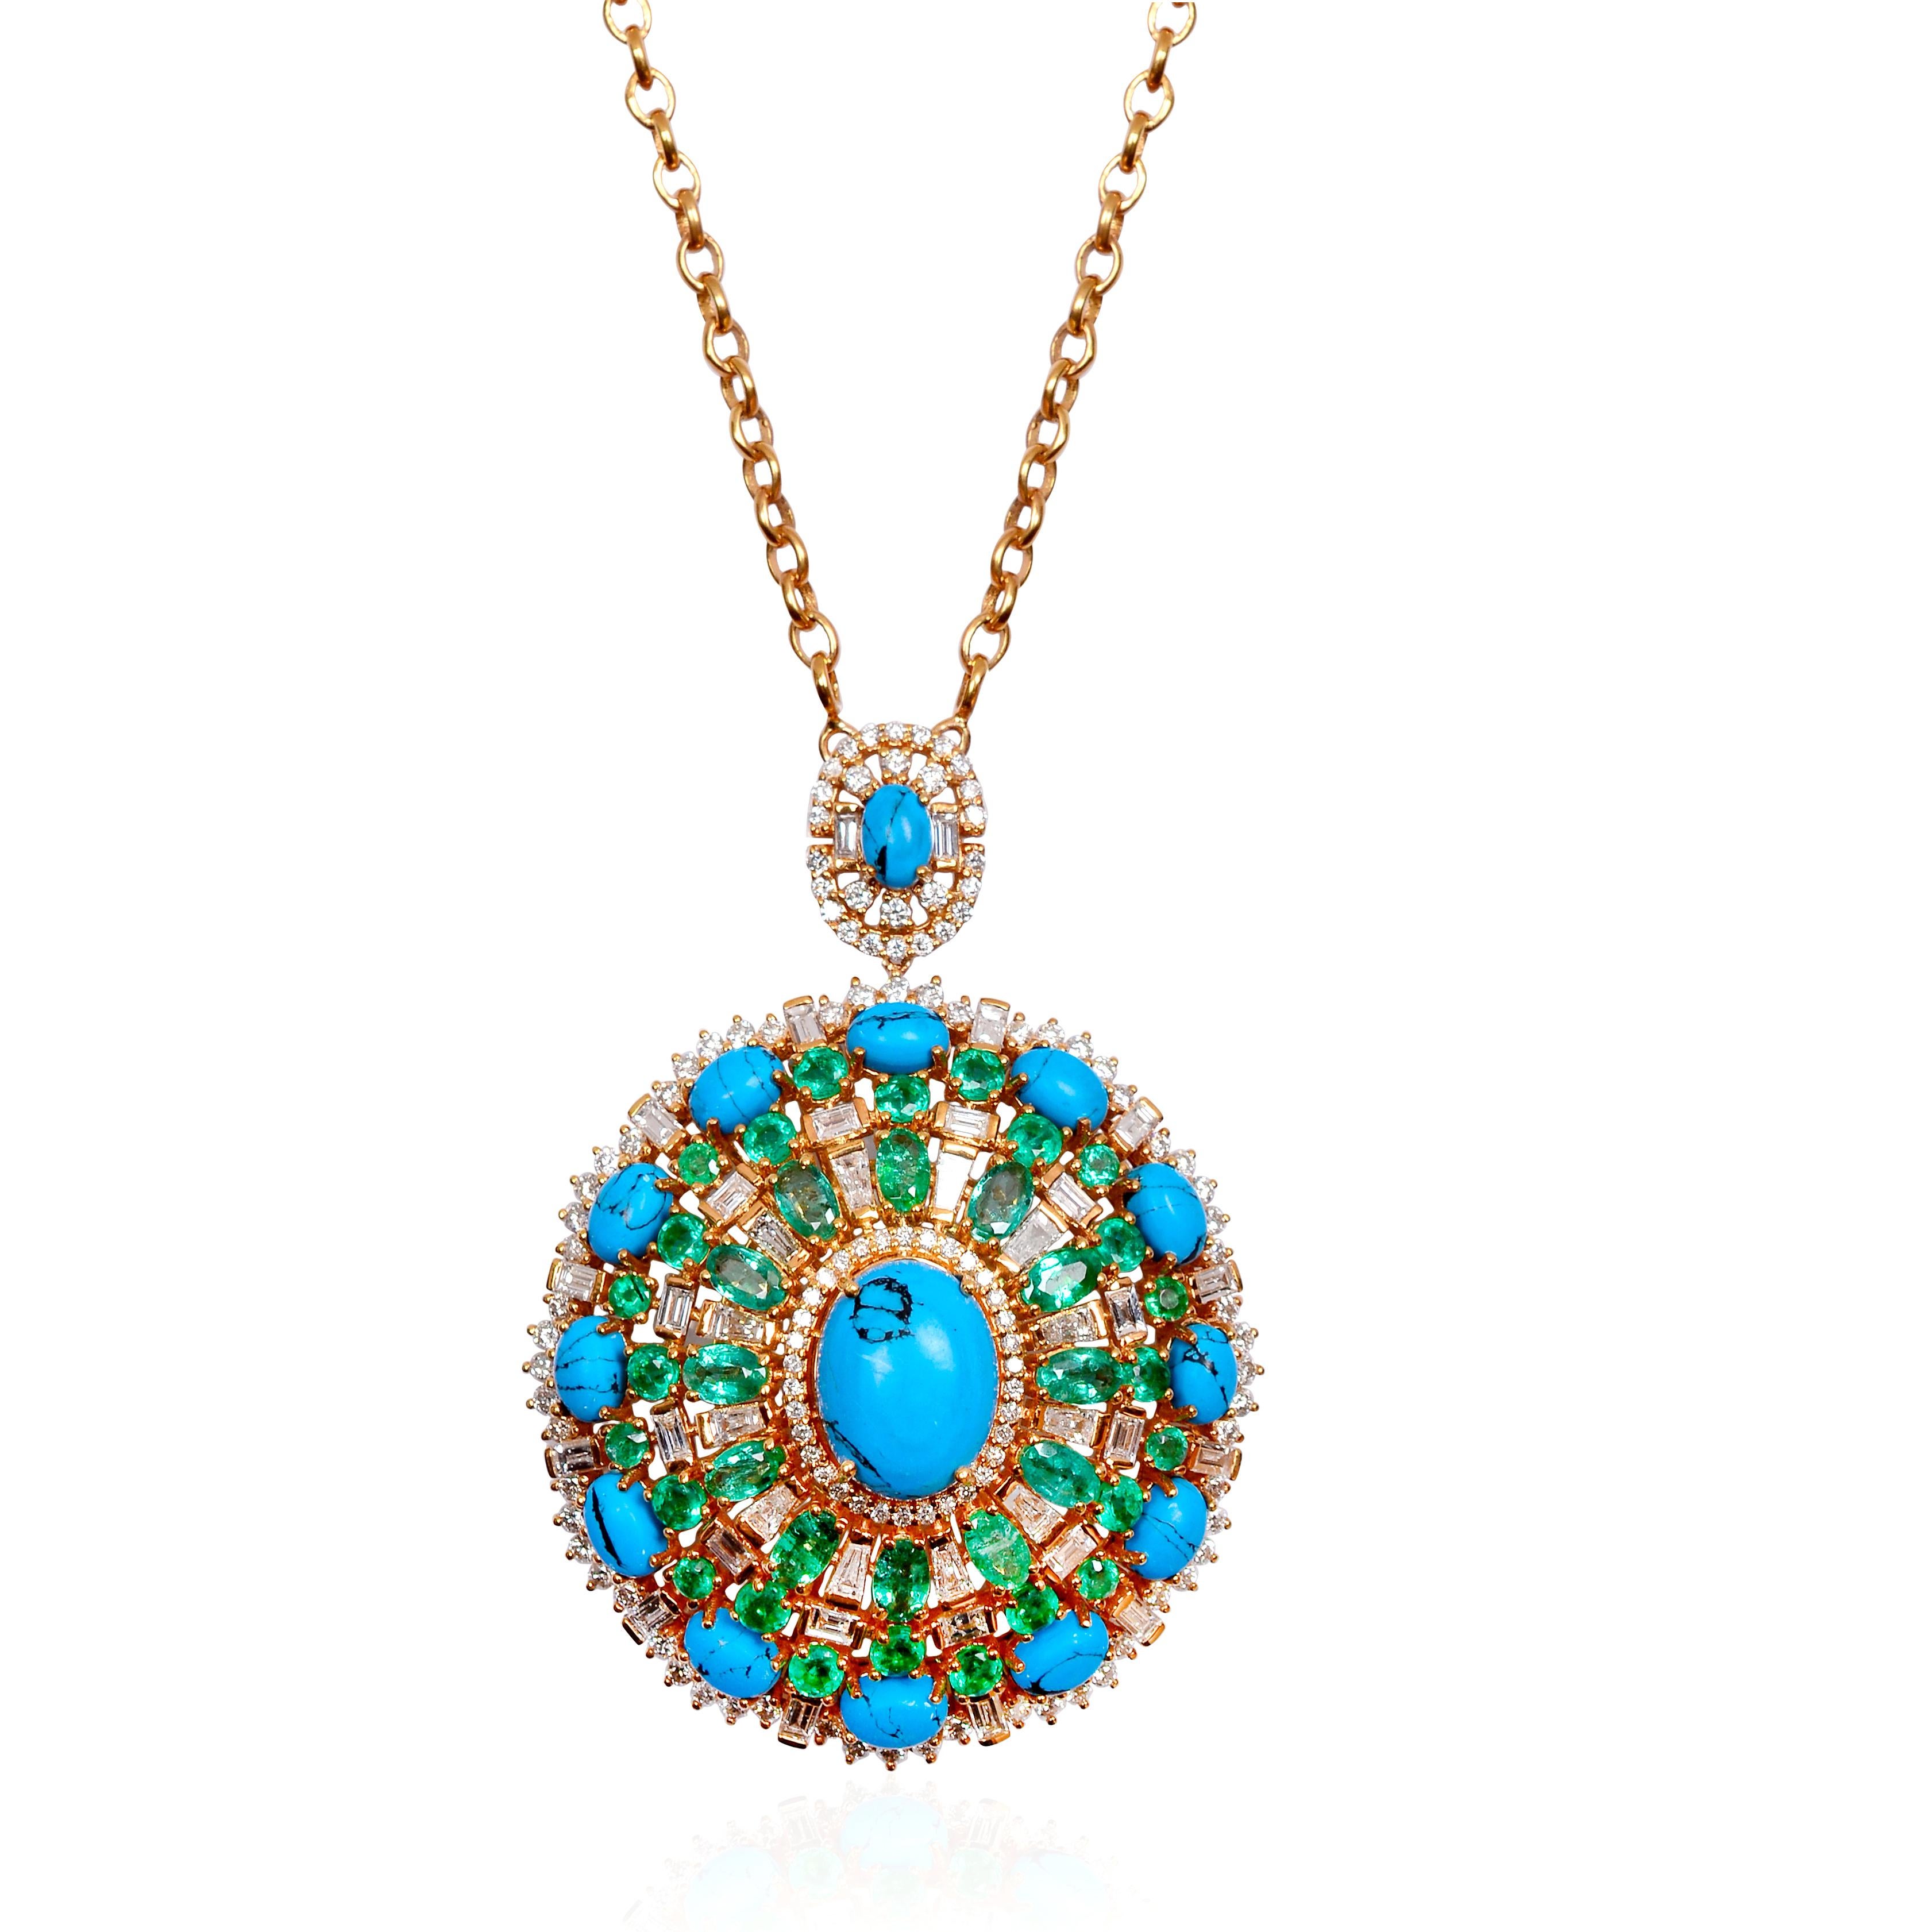 Surrounding the emerald turquoise gemstone are dazzling diamonds, meticulously set in 18-karat yellow gold. The diamonds add a touch of sparkle and brilliance, elevating the overall design of the pendant. Their radiant beauty enhances the natural